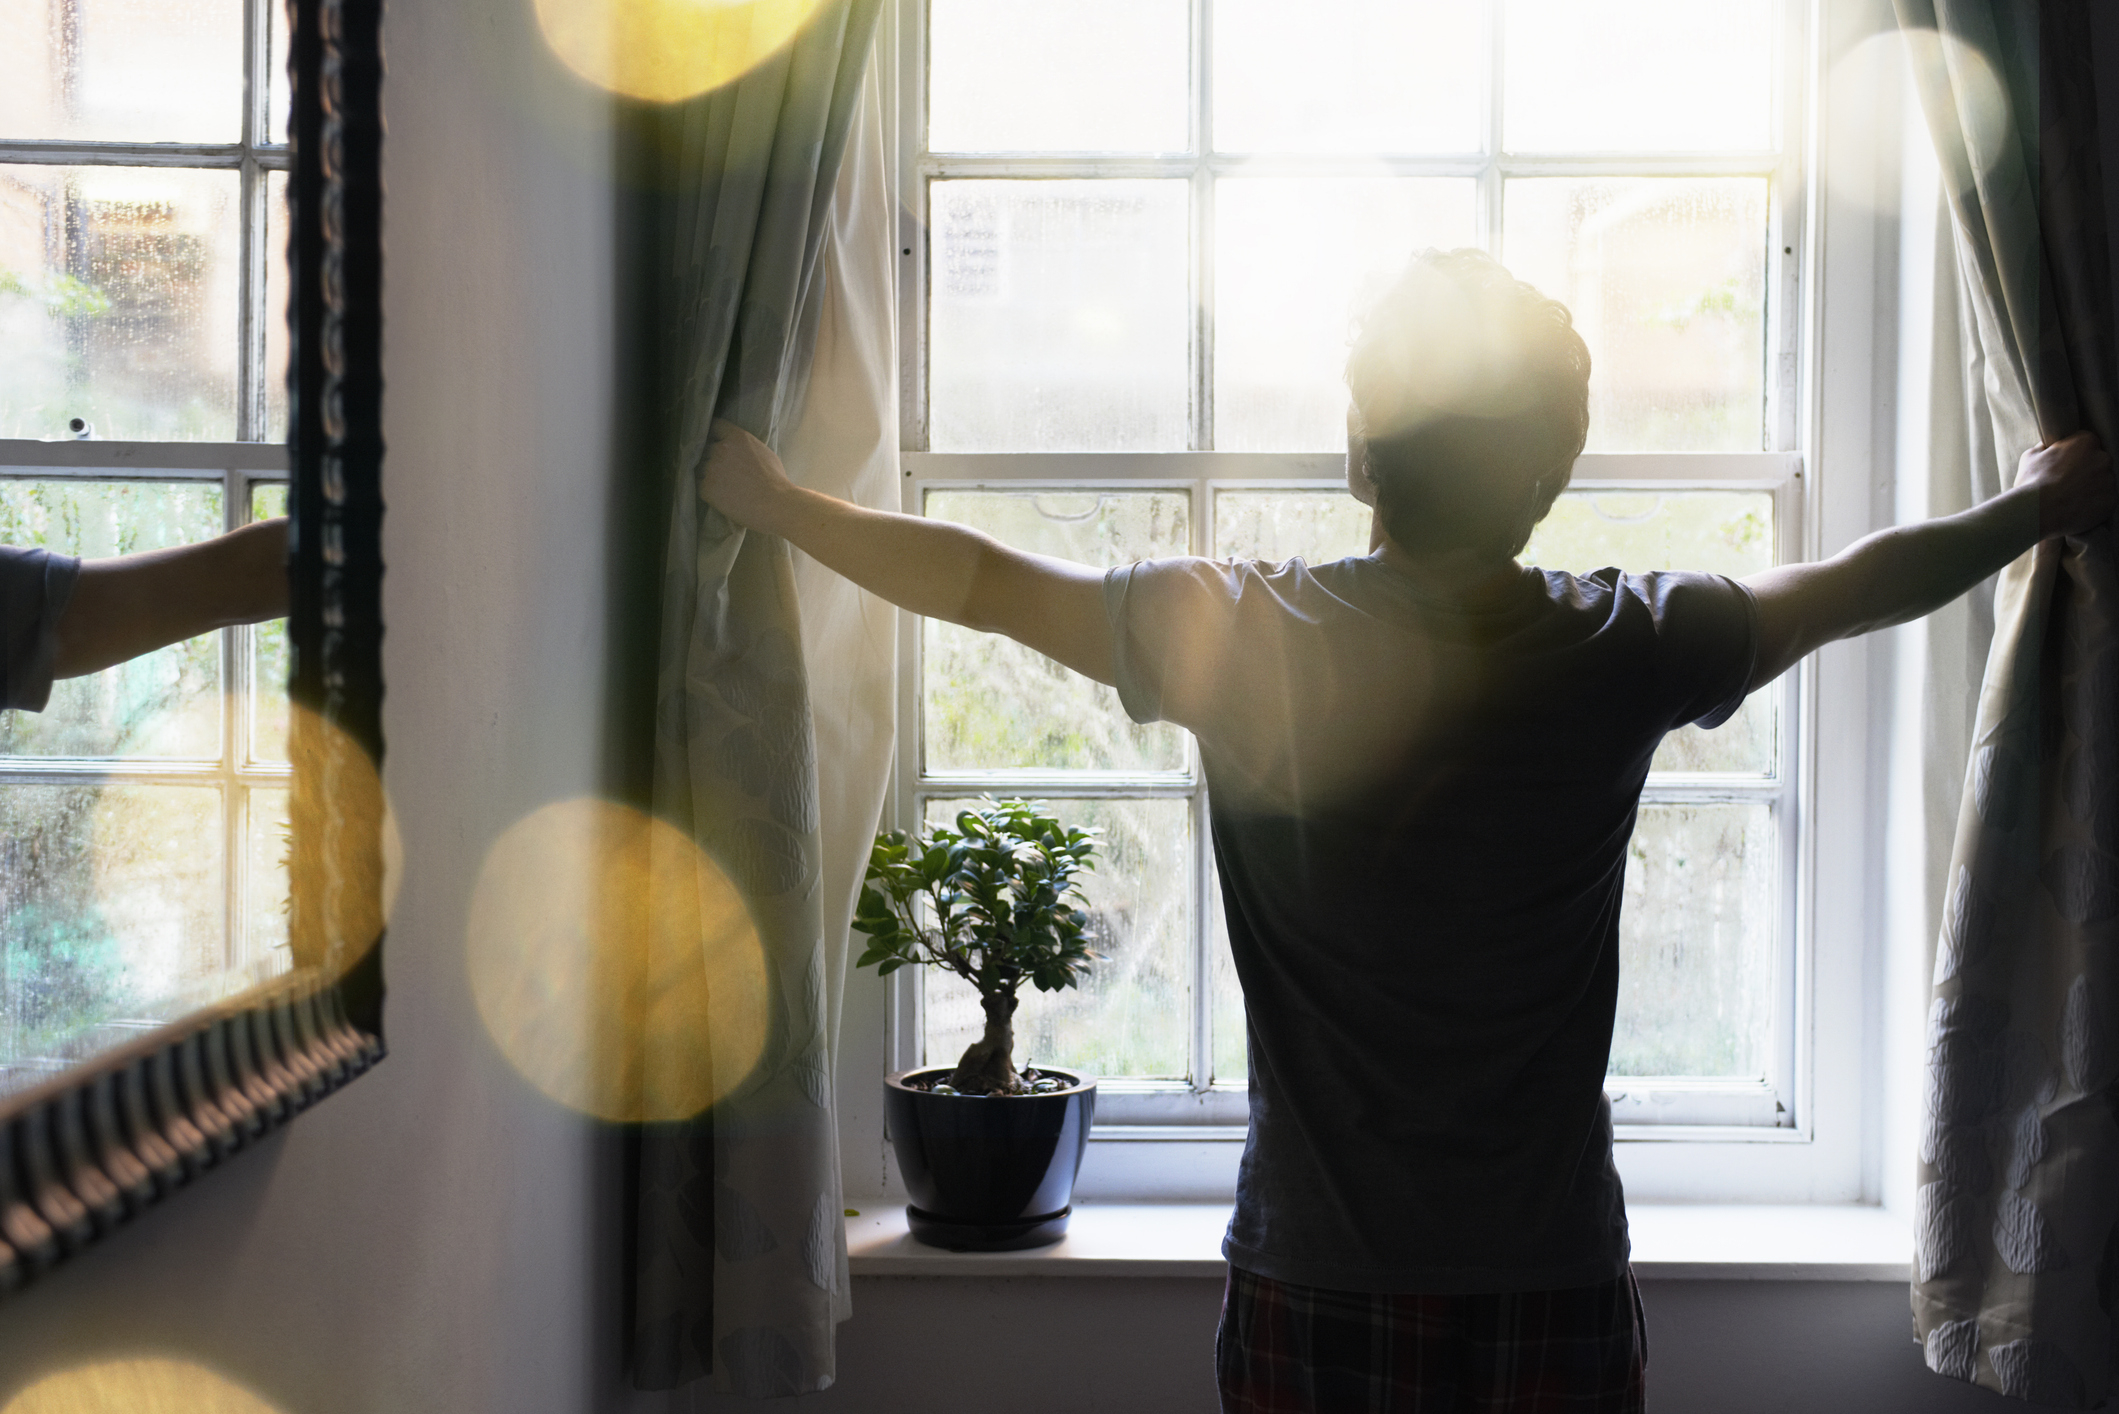 Person opening curtains to look out window, backlit with a warm glow, suggesting a new beginning or fresh start